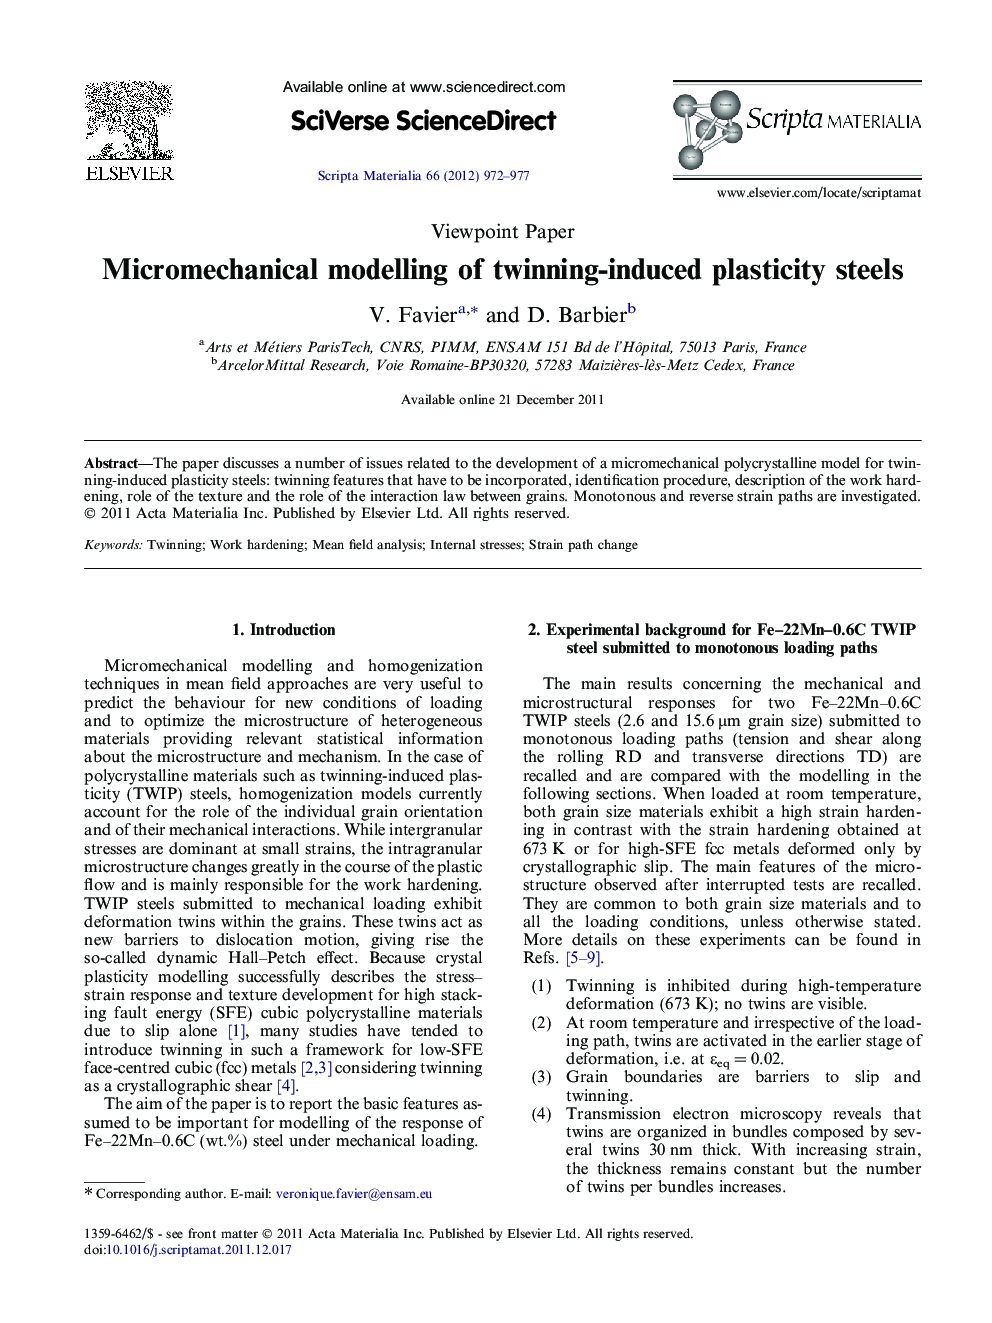 Micromechanical modelling of twinning-induced plasticity steels